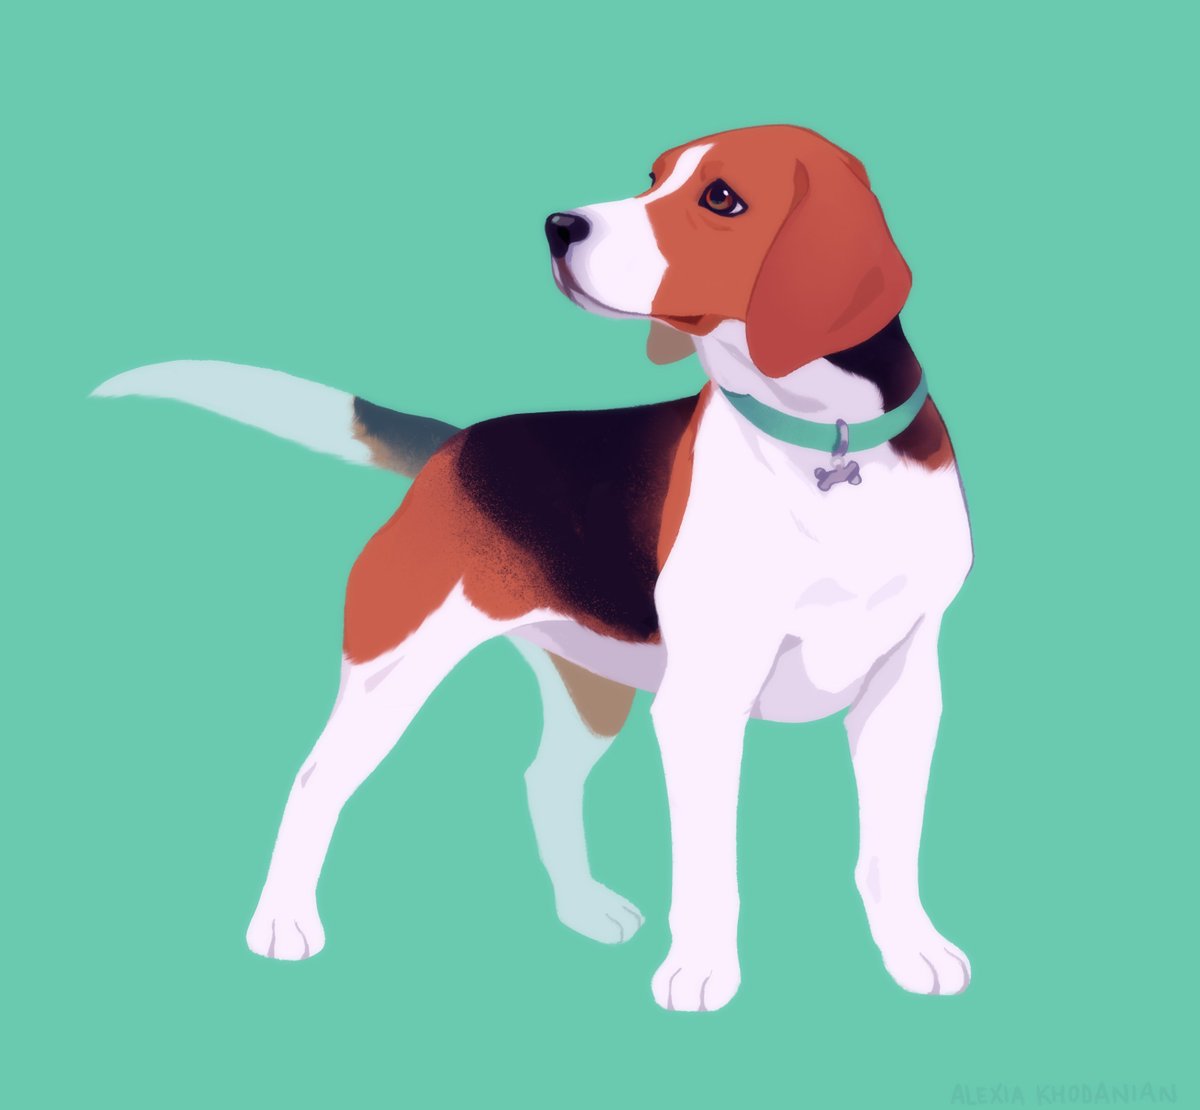  #doggust day 8: the beautiful, talented and iconic Beagle!!